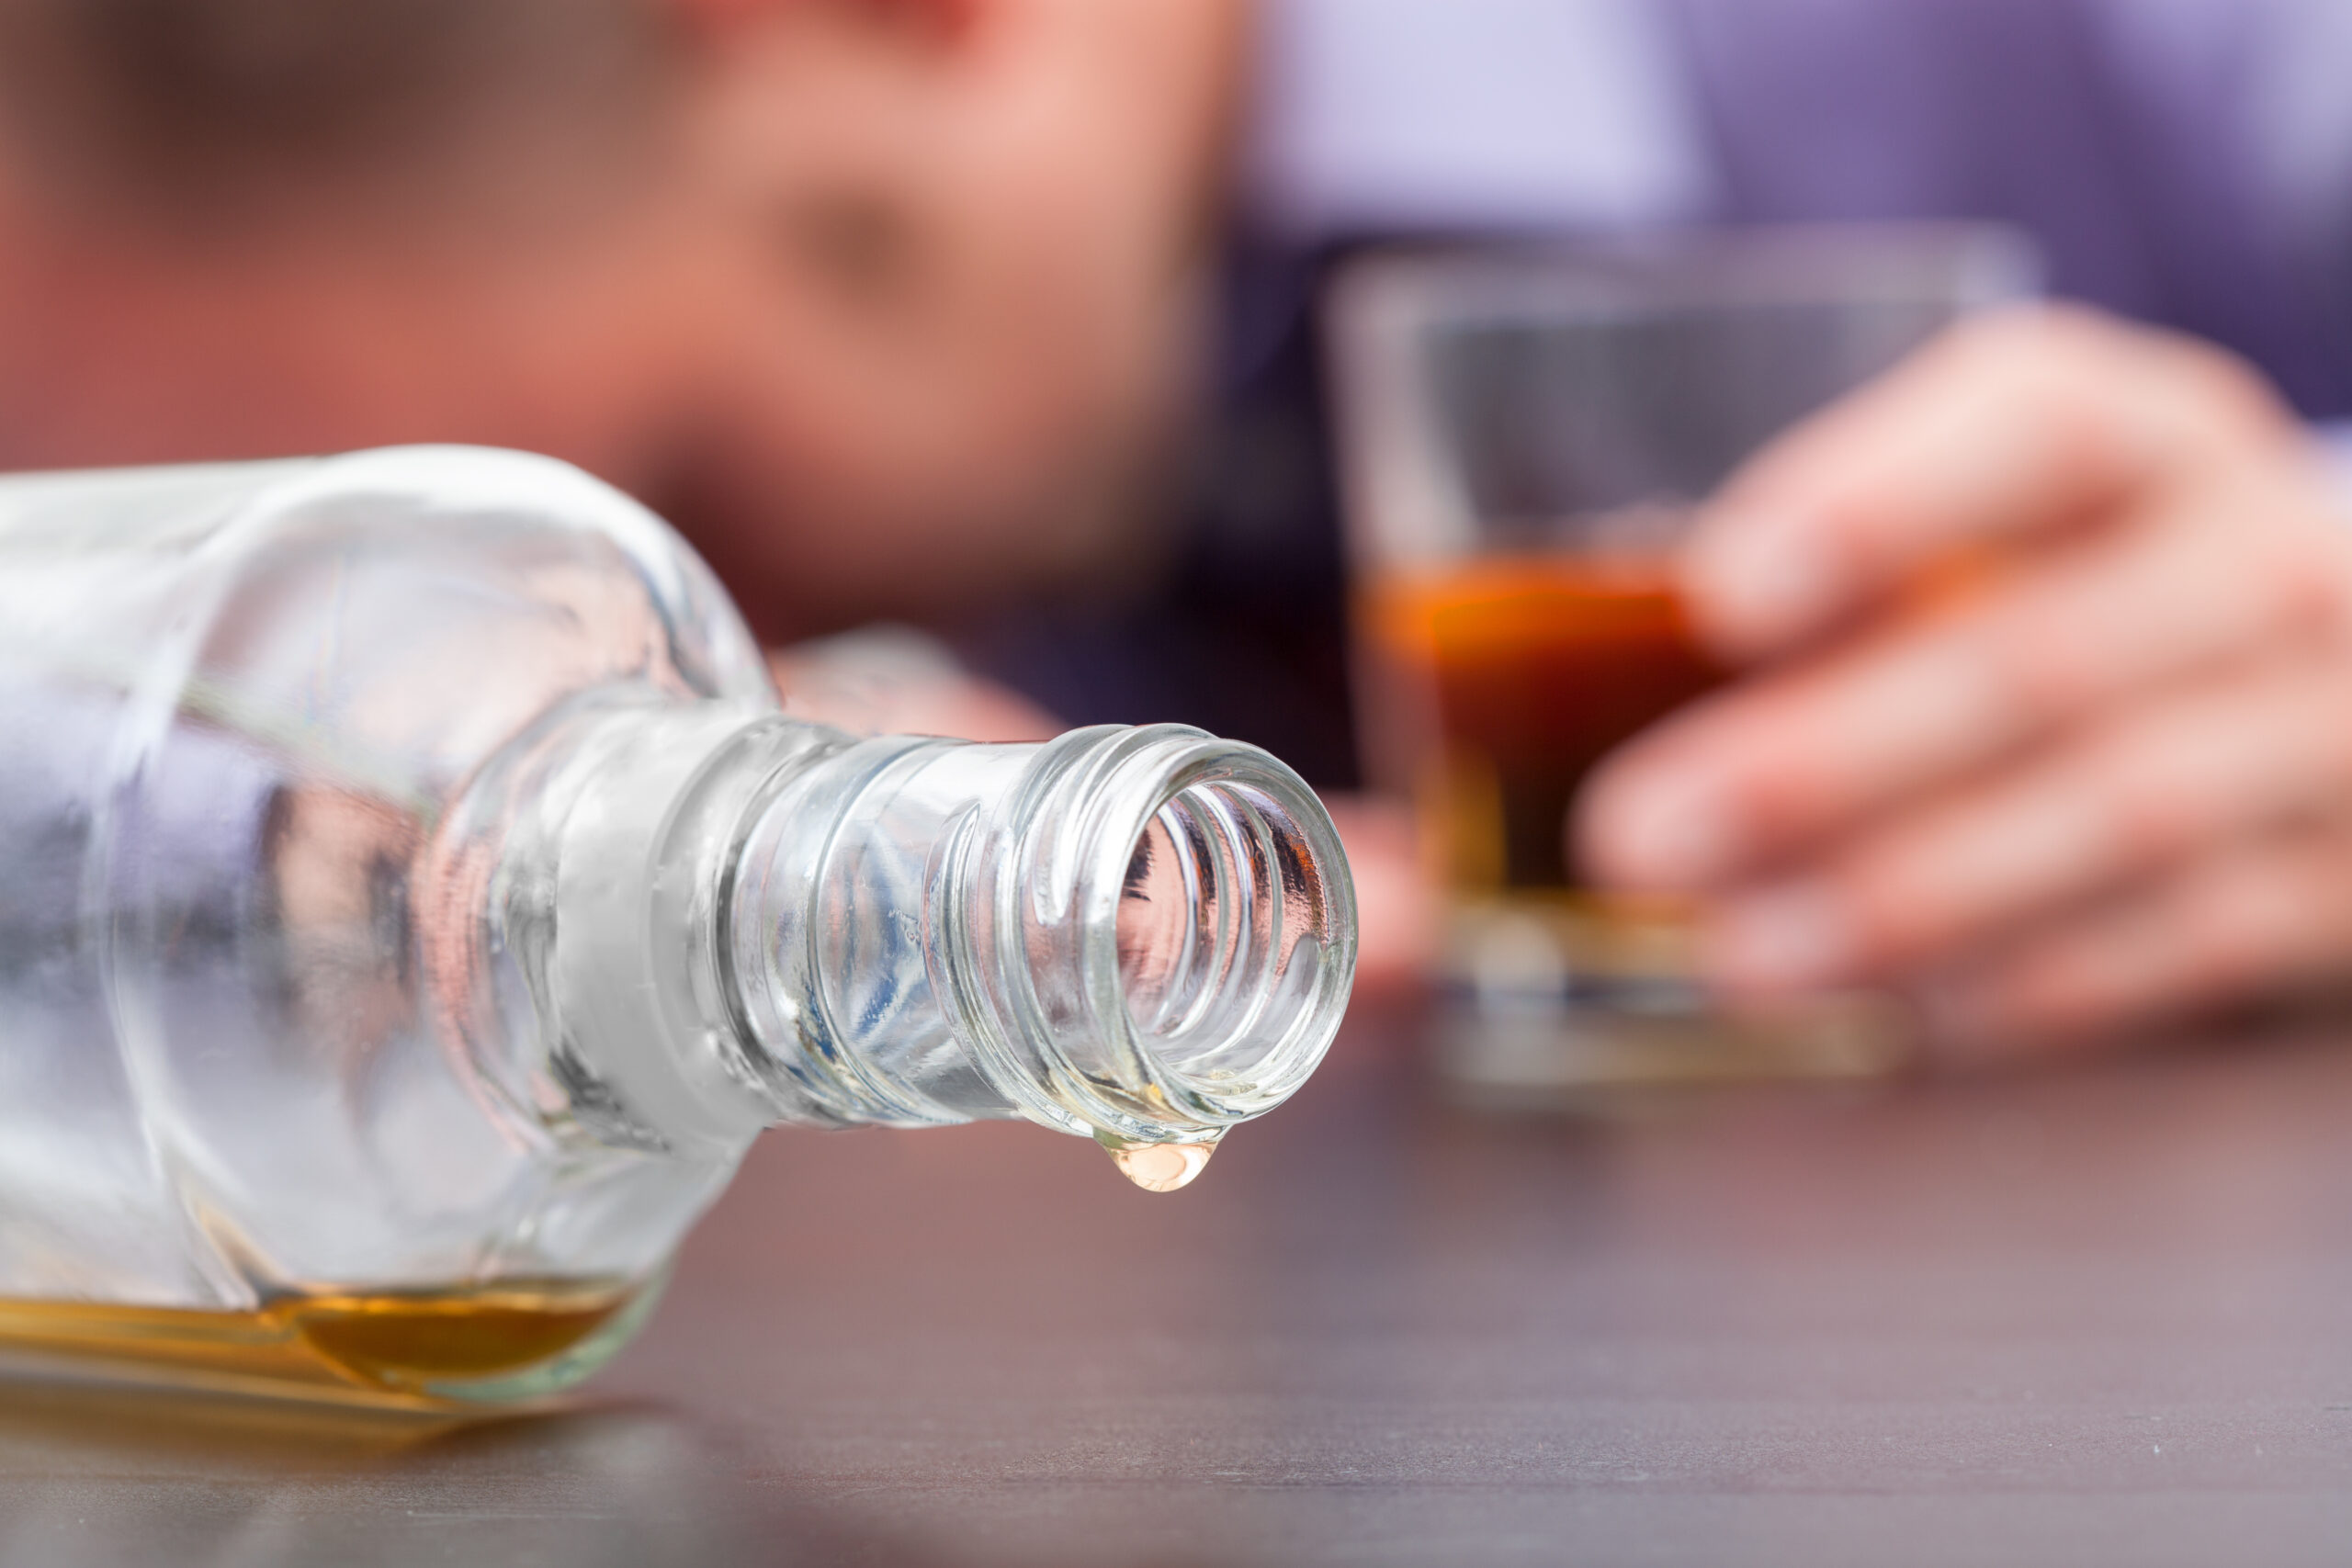 Why is alcohol addictive?